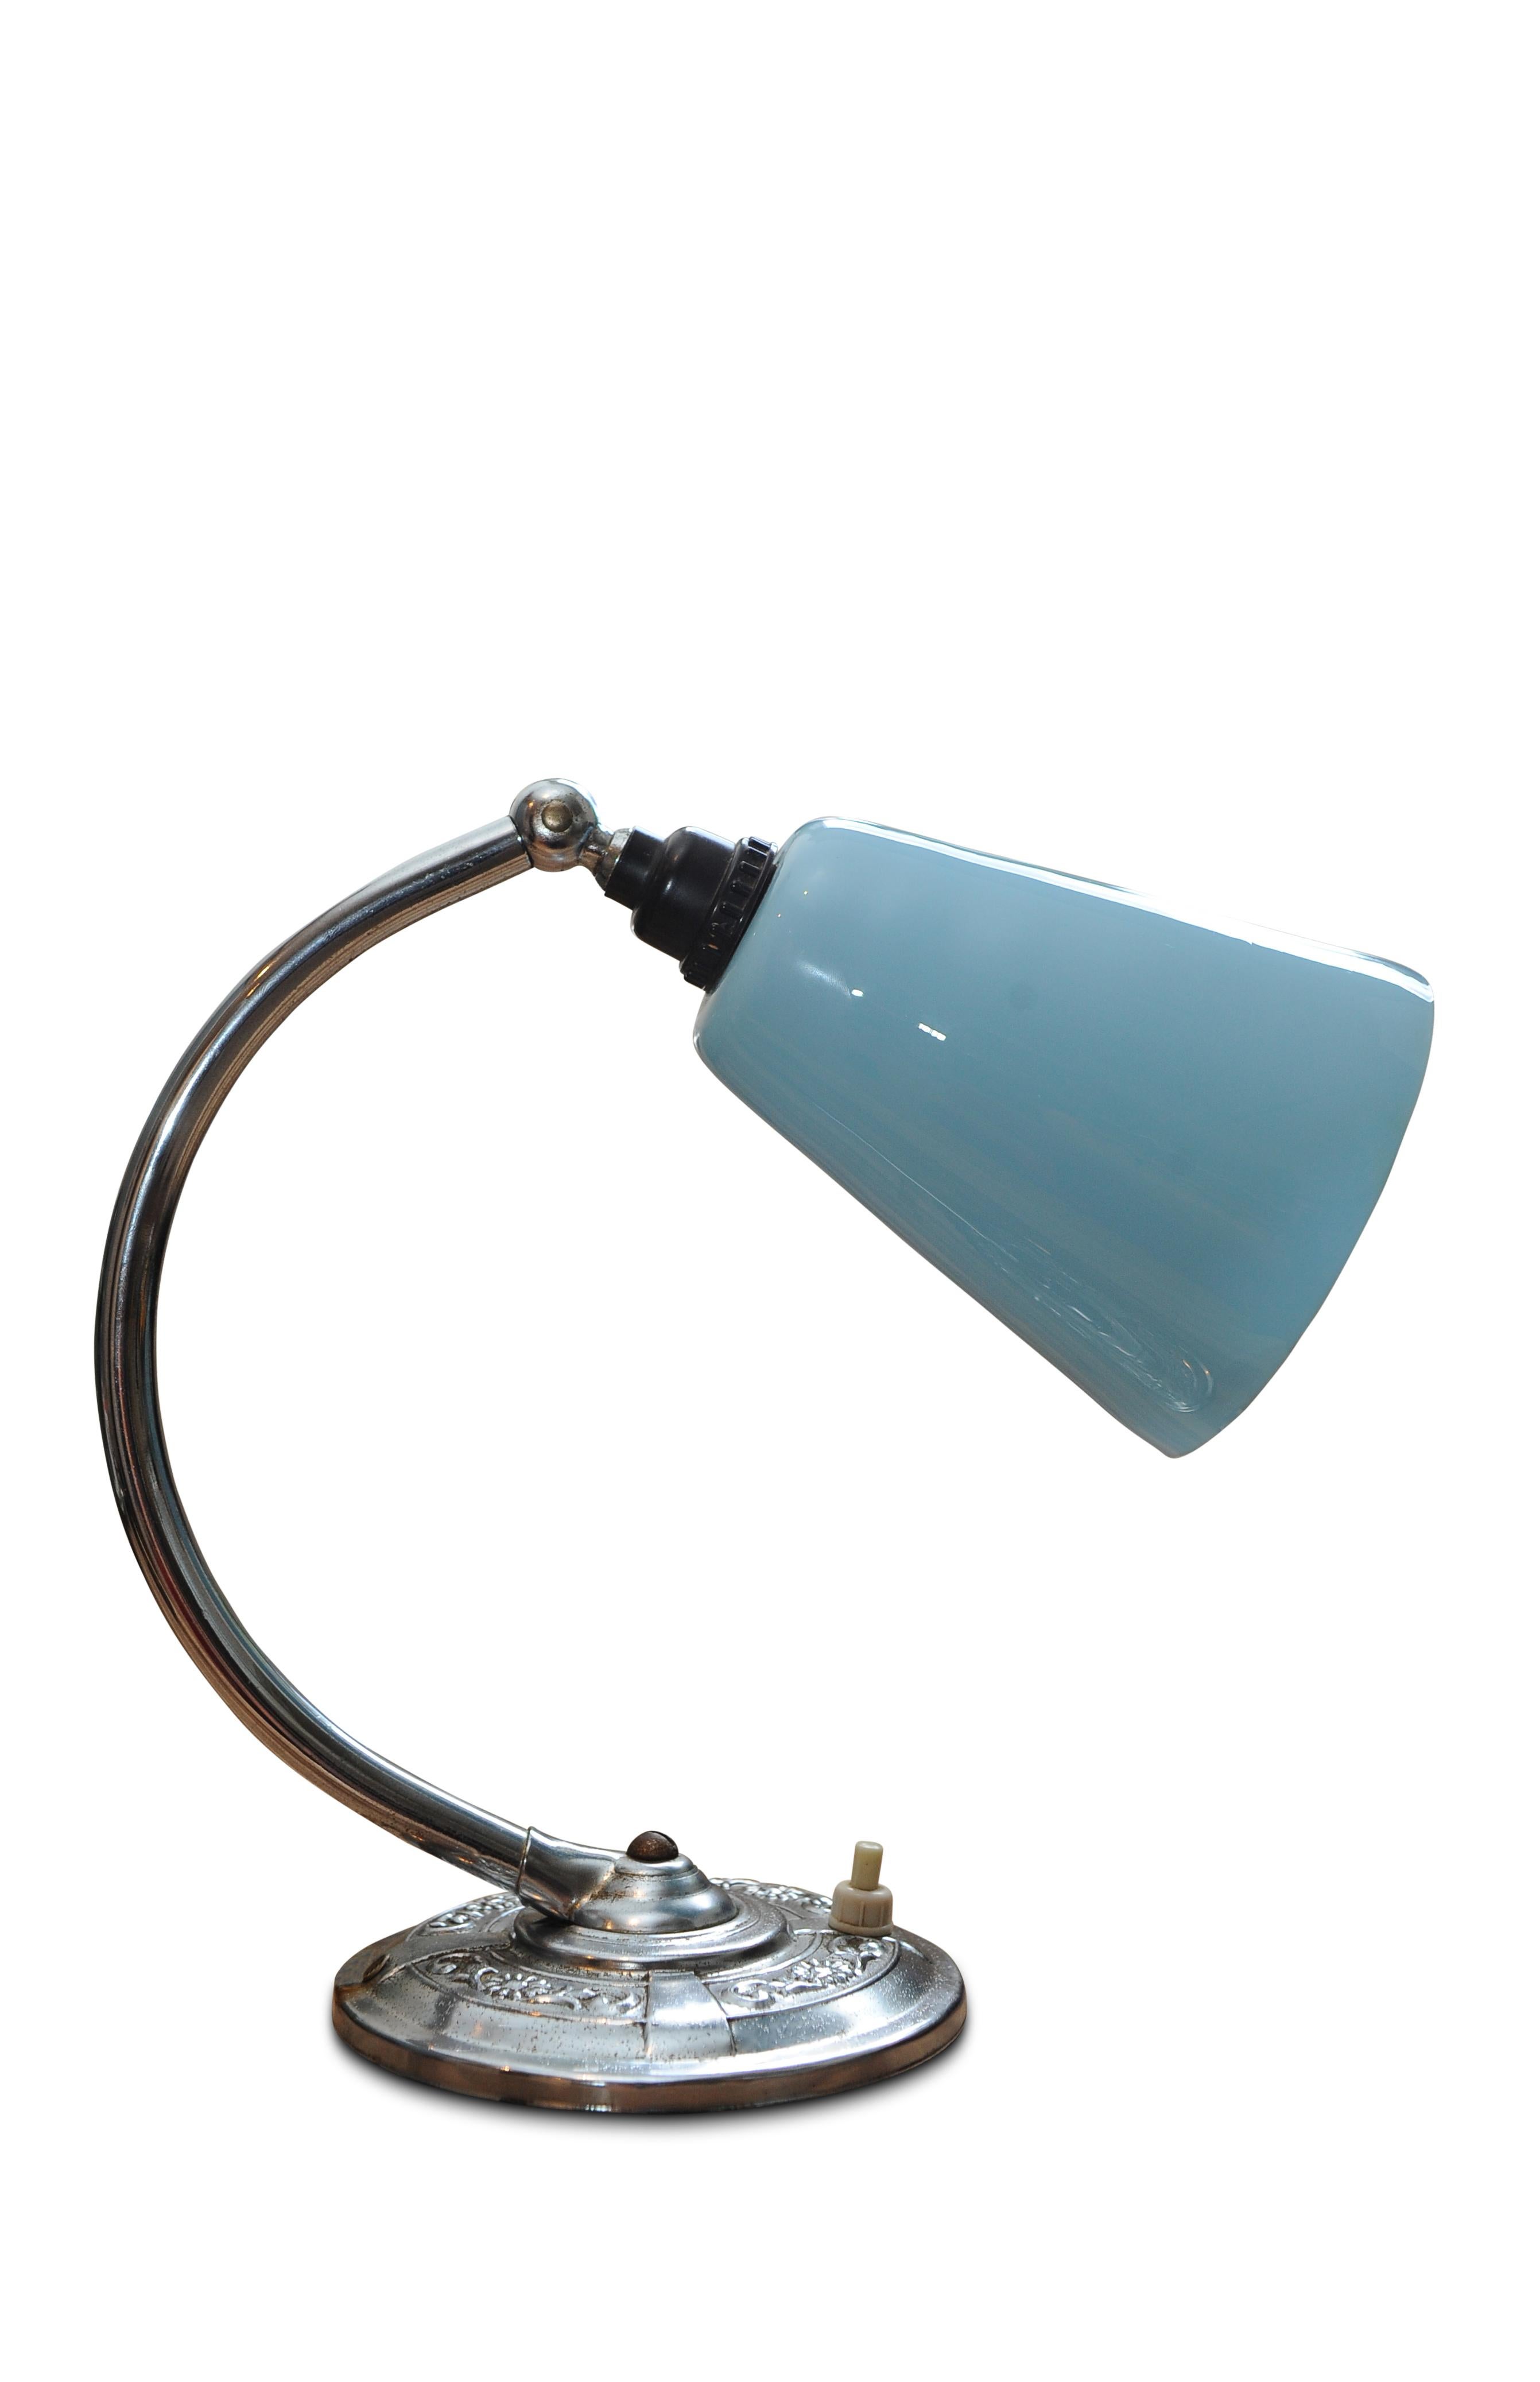 1930s Art Deco desk / table lamp, chrome base, chrome bend support & blue glass shade.
Shade is on a pivot so can be adjusted up and down.
Electrics have been checked and PAT tested to British safety standards.